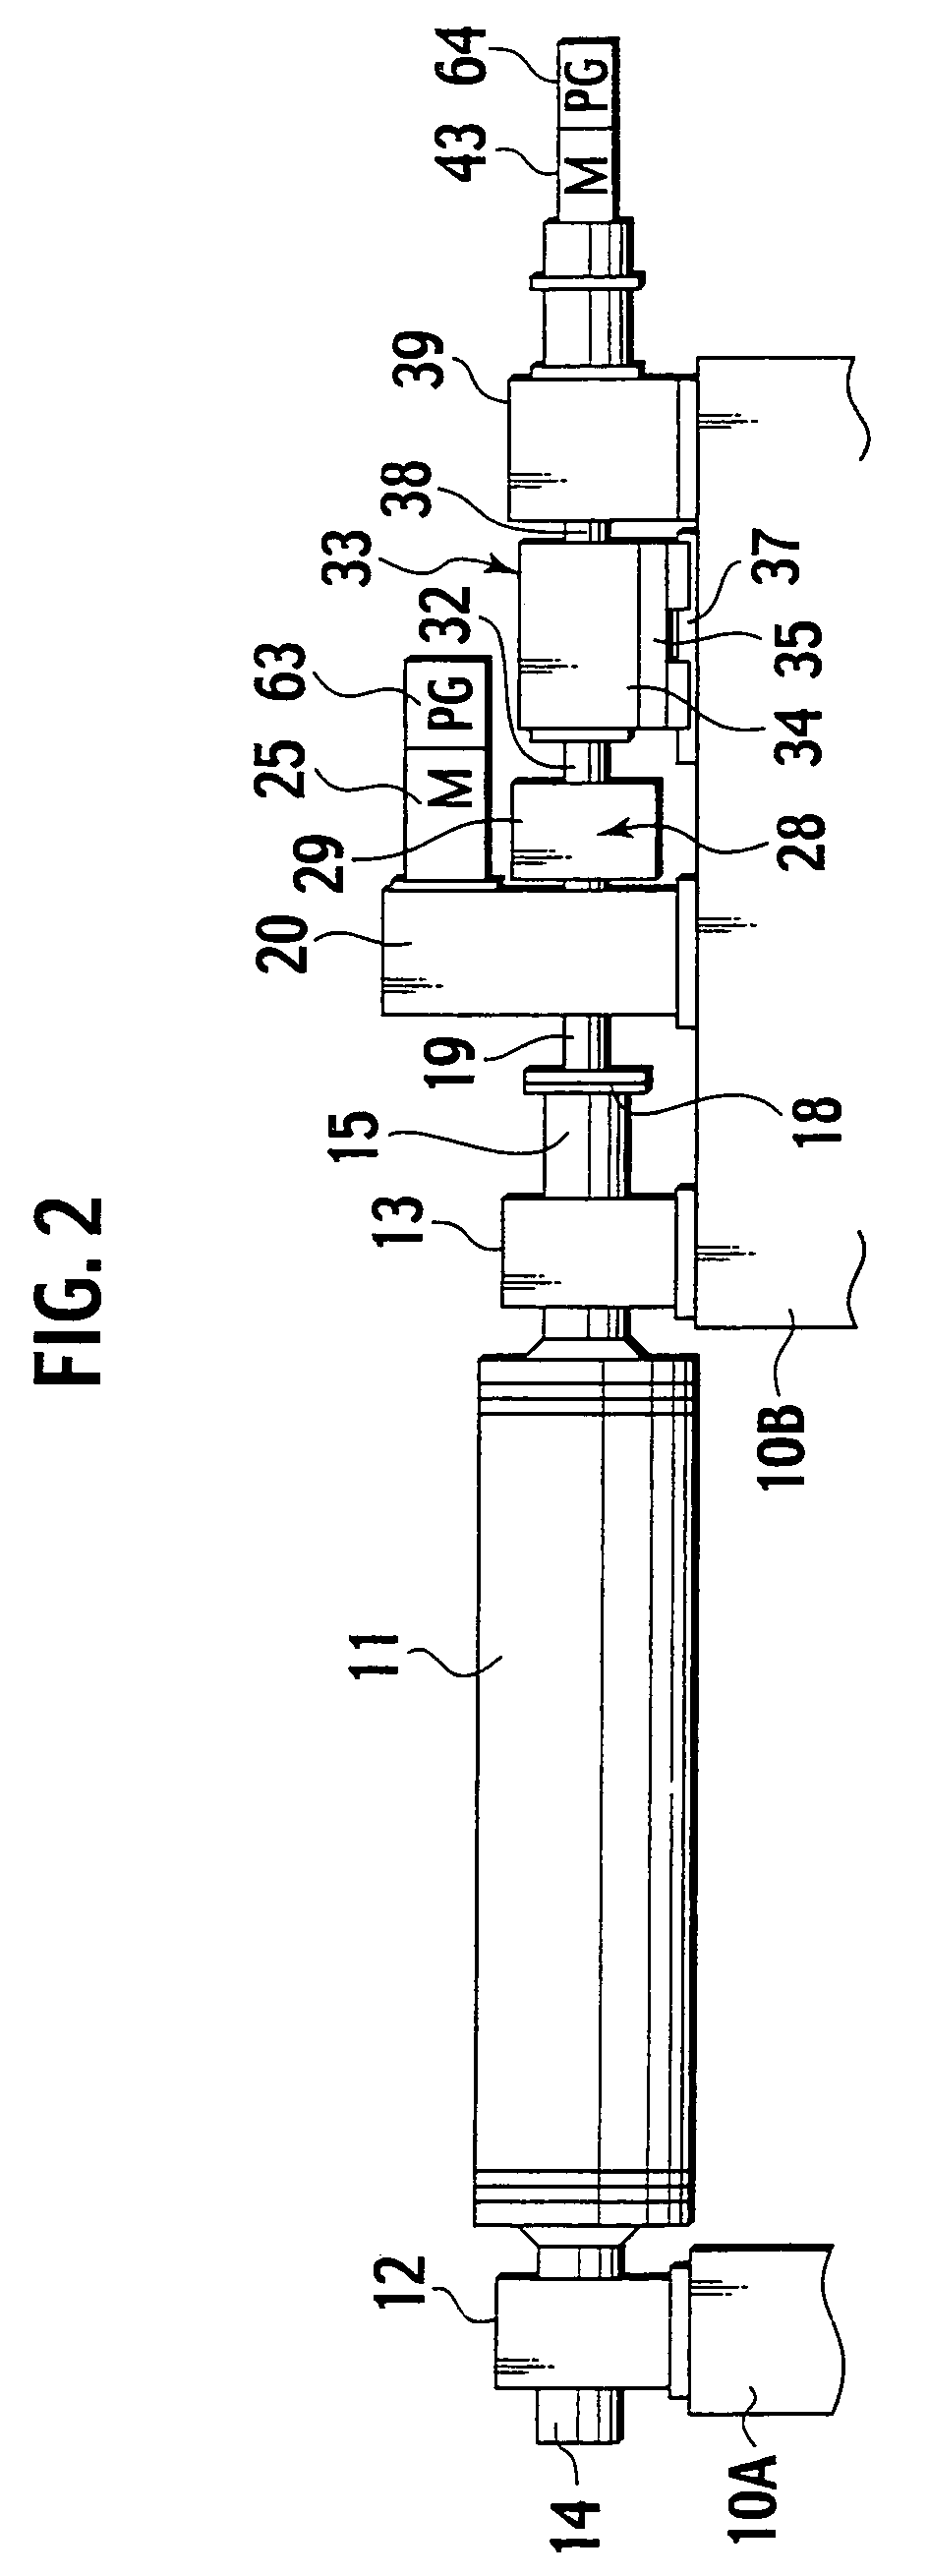 Forming phase alignment device in formed sheet manufacturing apparatus